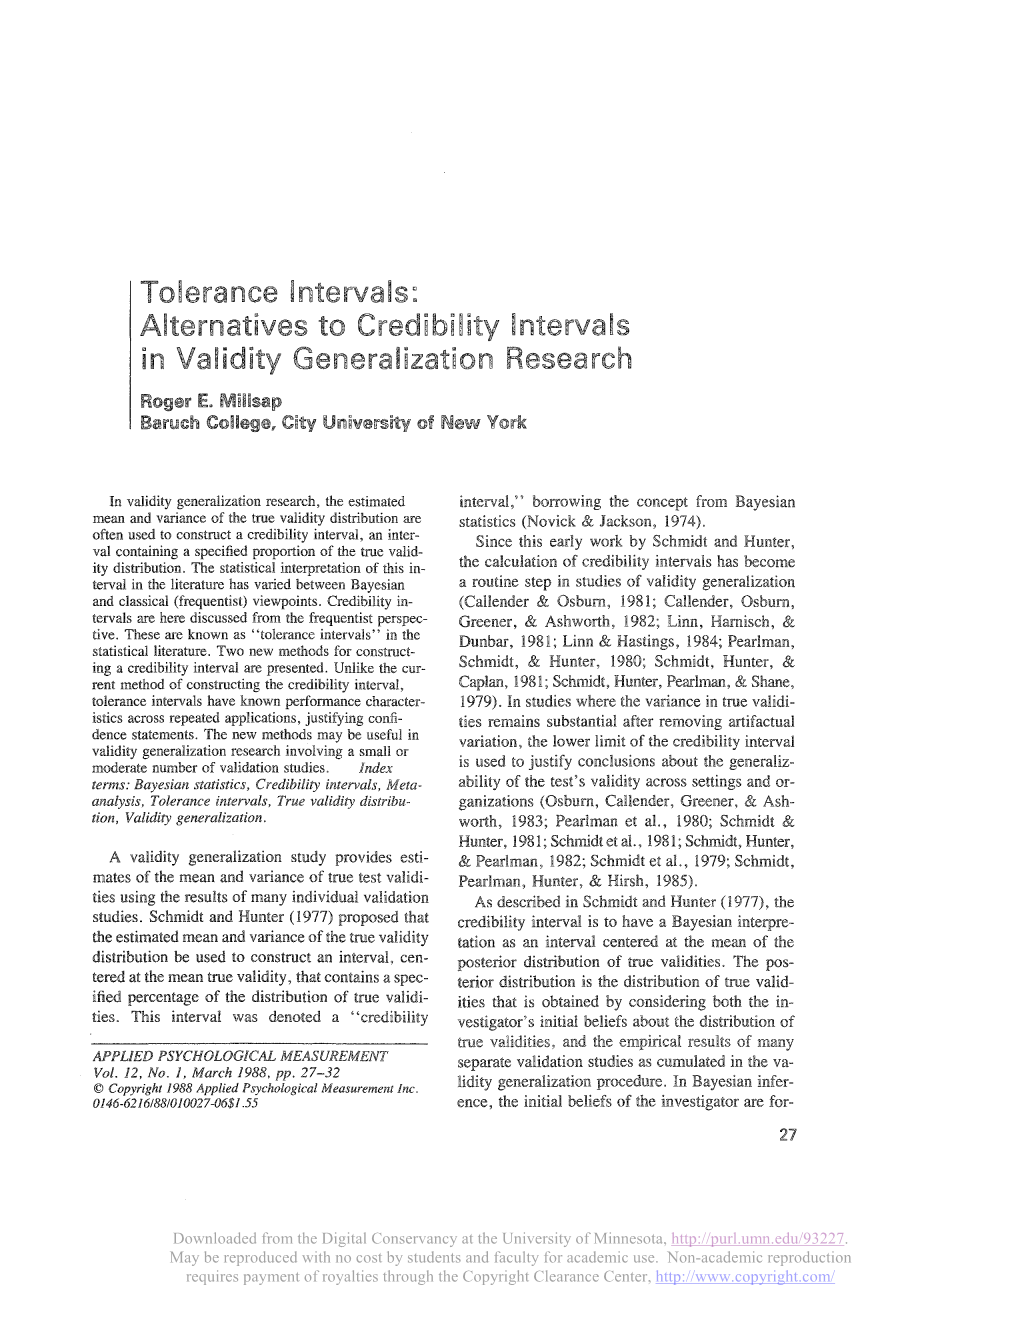 Alternatives to Credibility Intervals in Validity Generalization Research Roger E